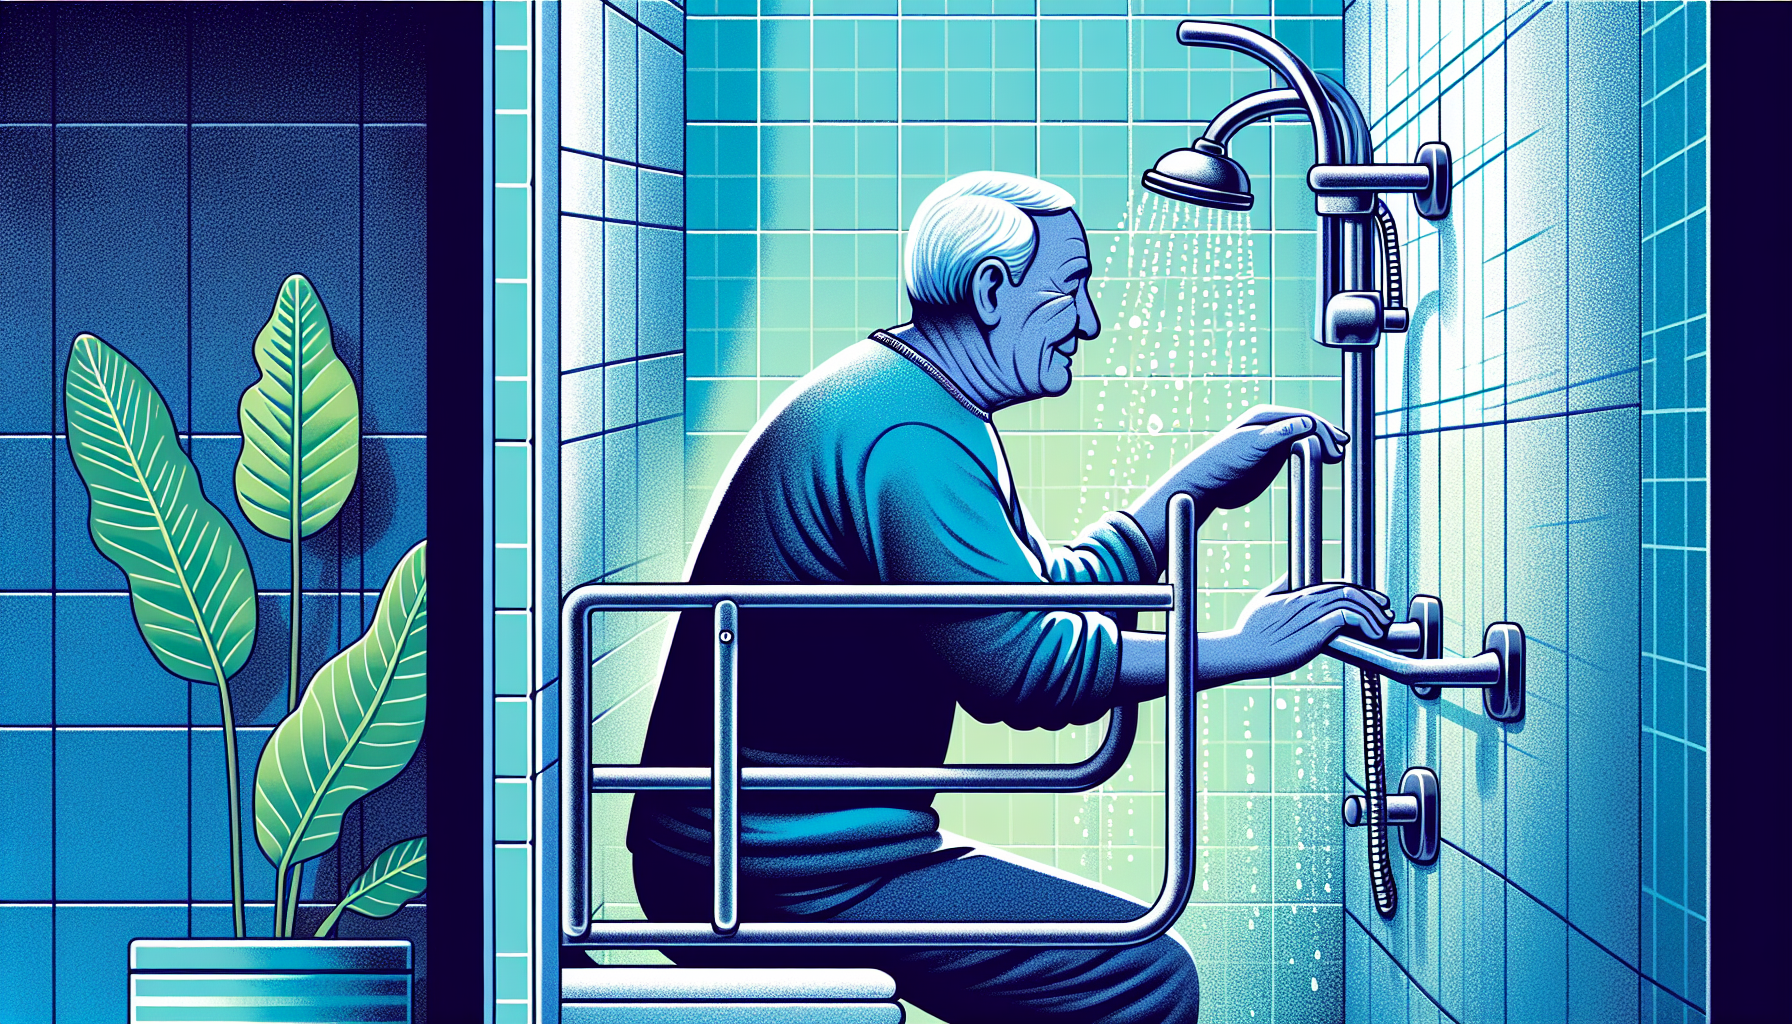 Elderly person using grab bar for support in the shower